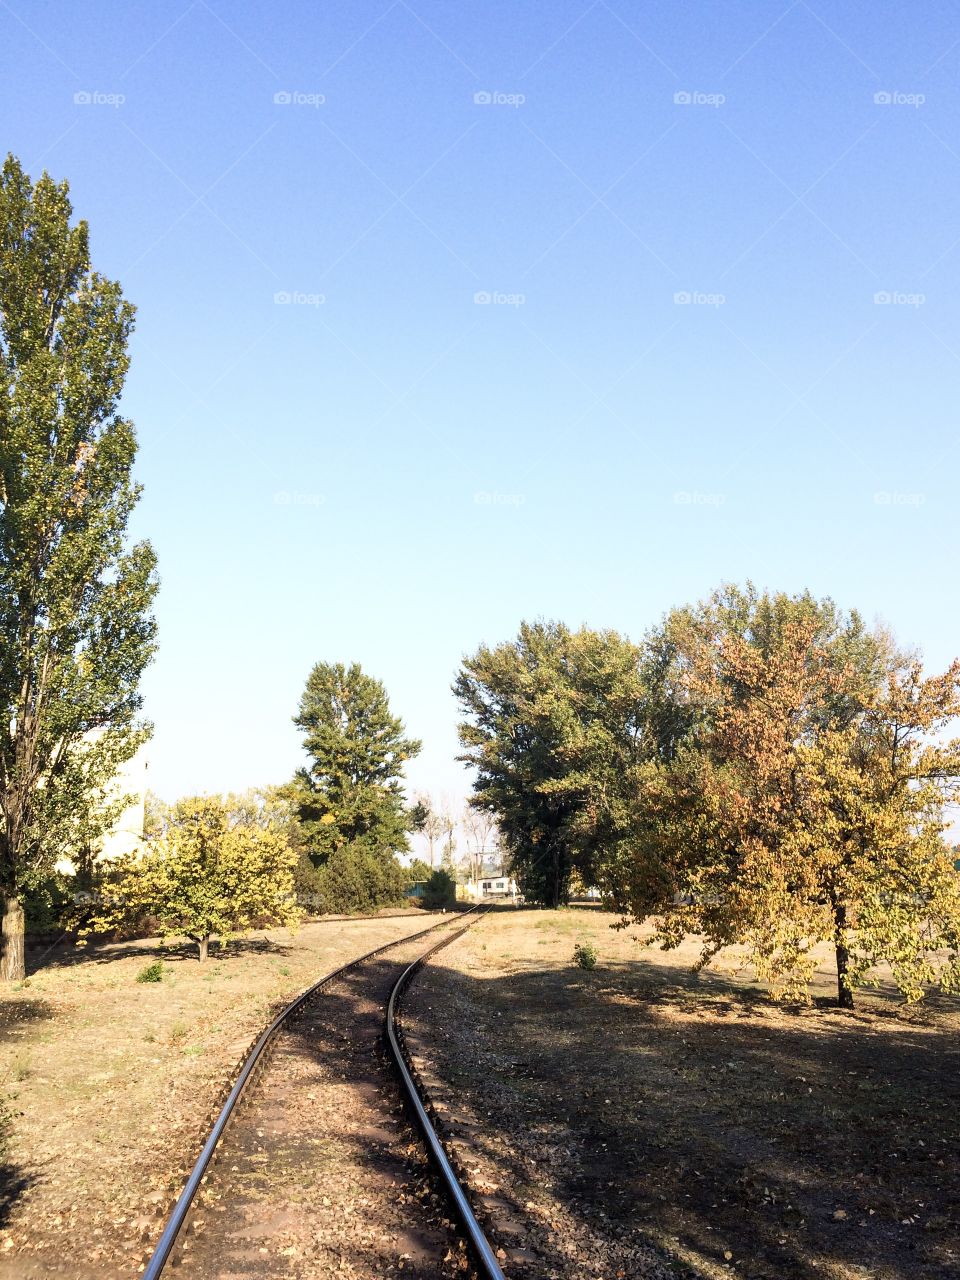 The railway. Landscape. Perspective. Way. Blue sky. Trees. 